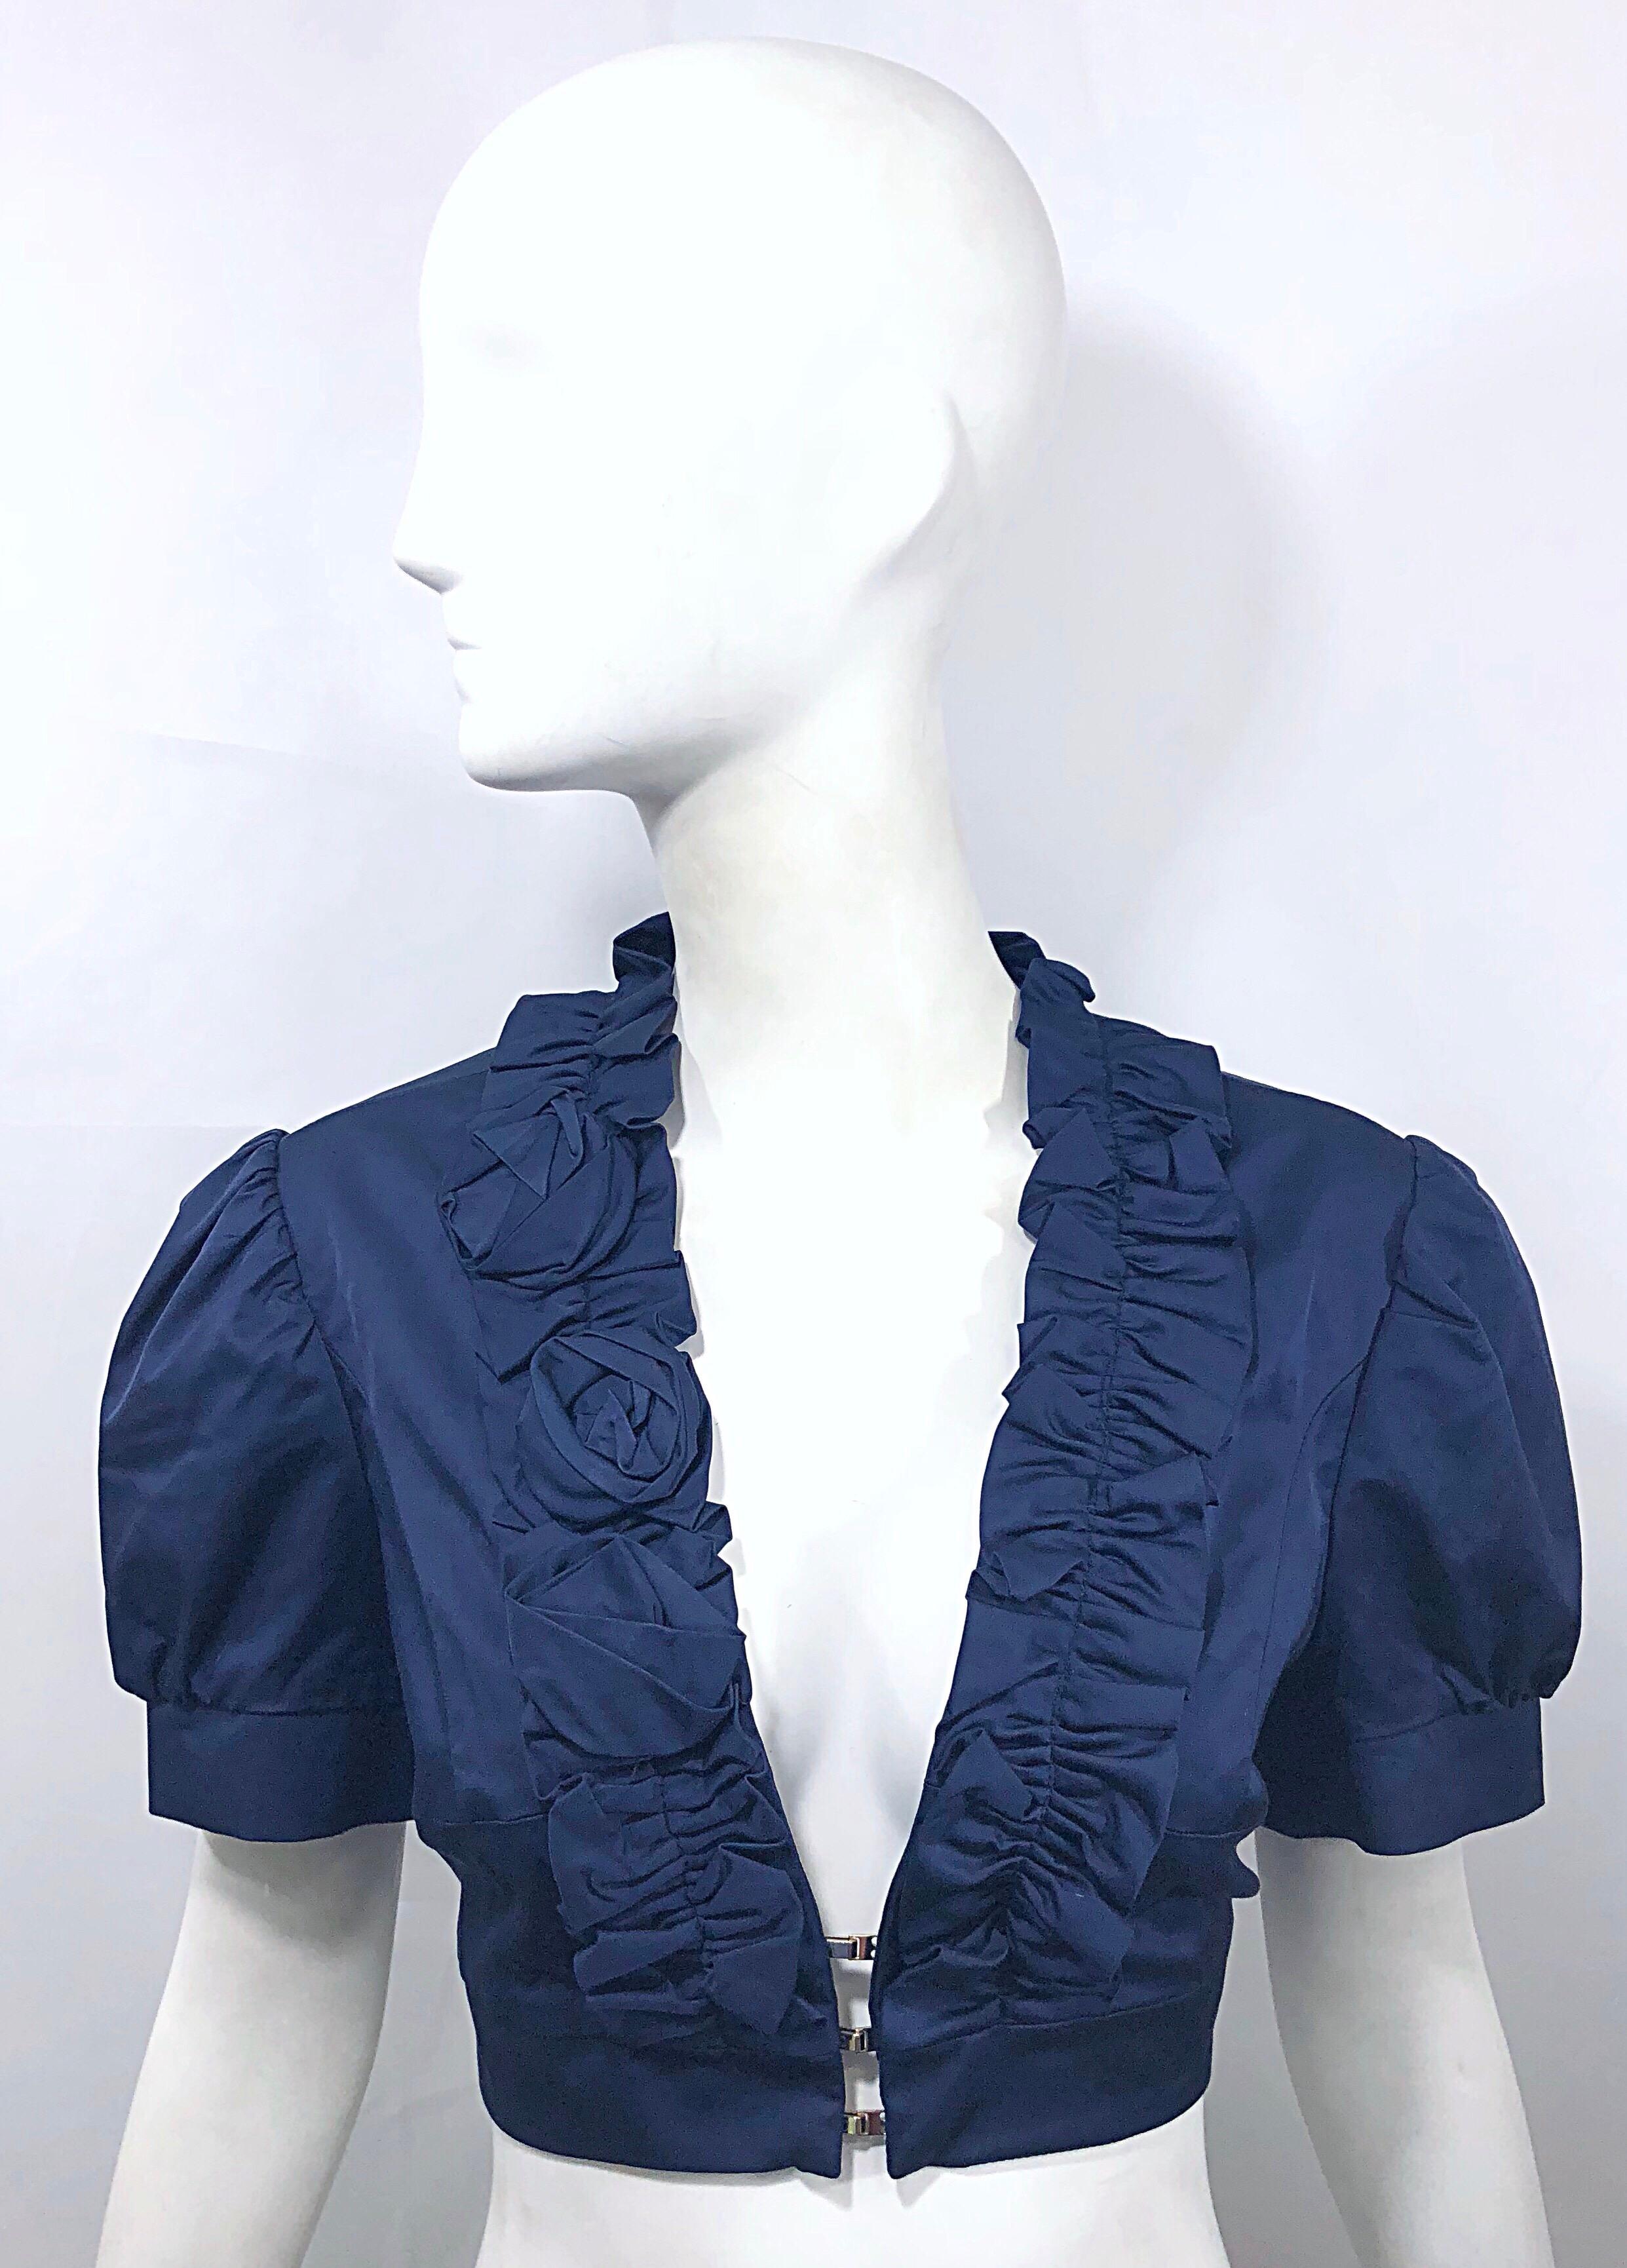 New FLAVIO CASTELLANI 2000s navy blue cropped short sleeve top / jacket ! Features a luxurious fabric blend of Viscose (50%), Cotton (45%), and Spandex (5%) that has some stretch. Three silver hook-and-eye closures on front center. Rosette details